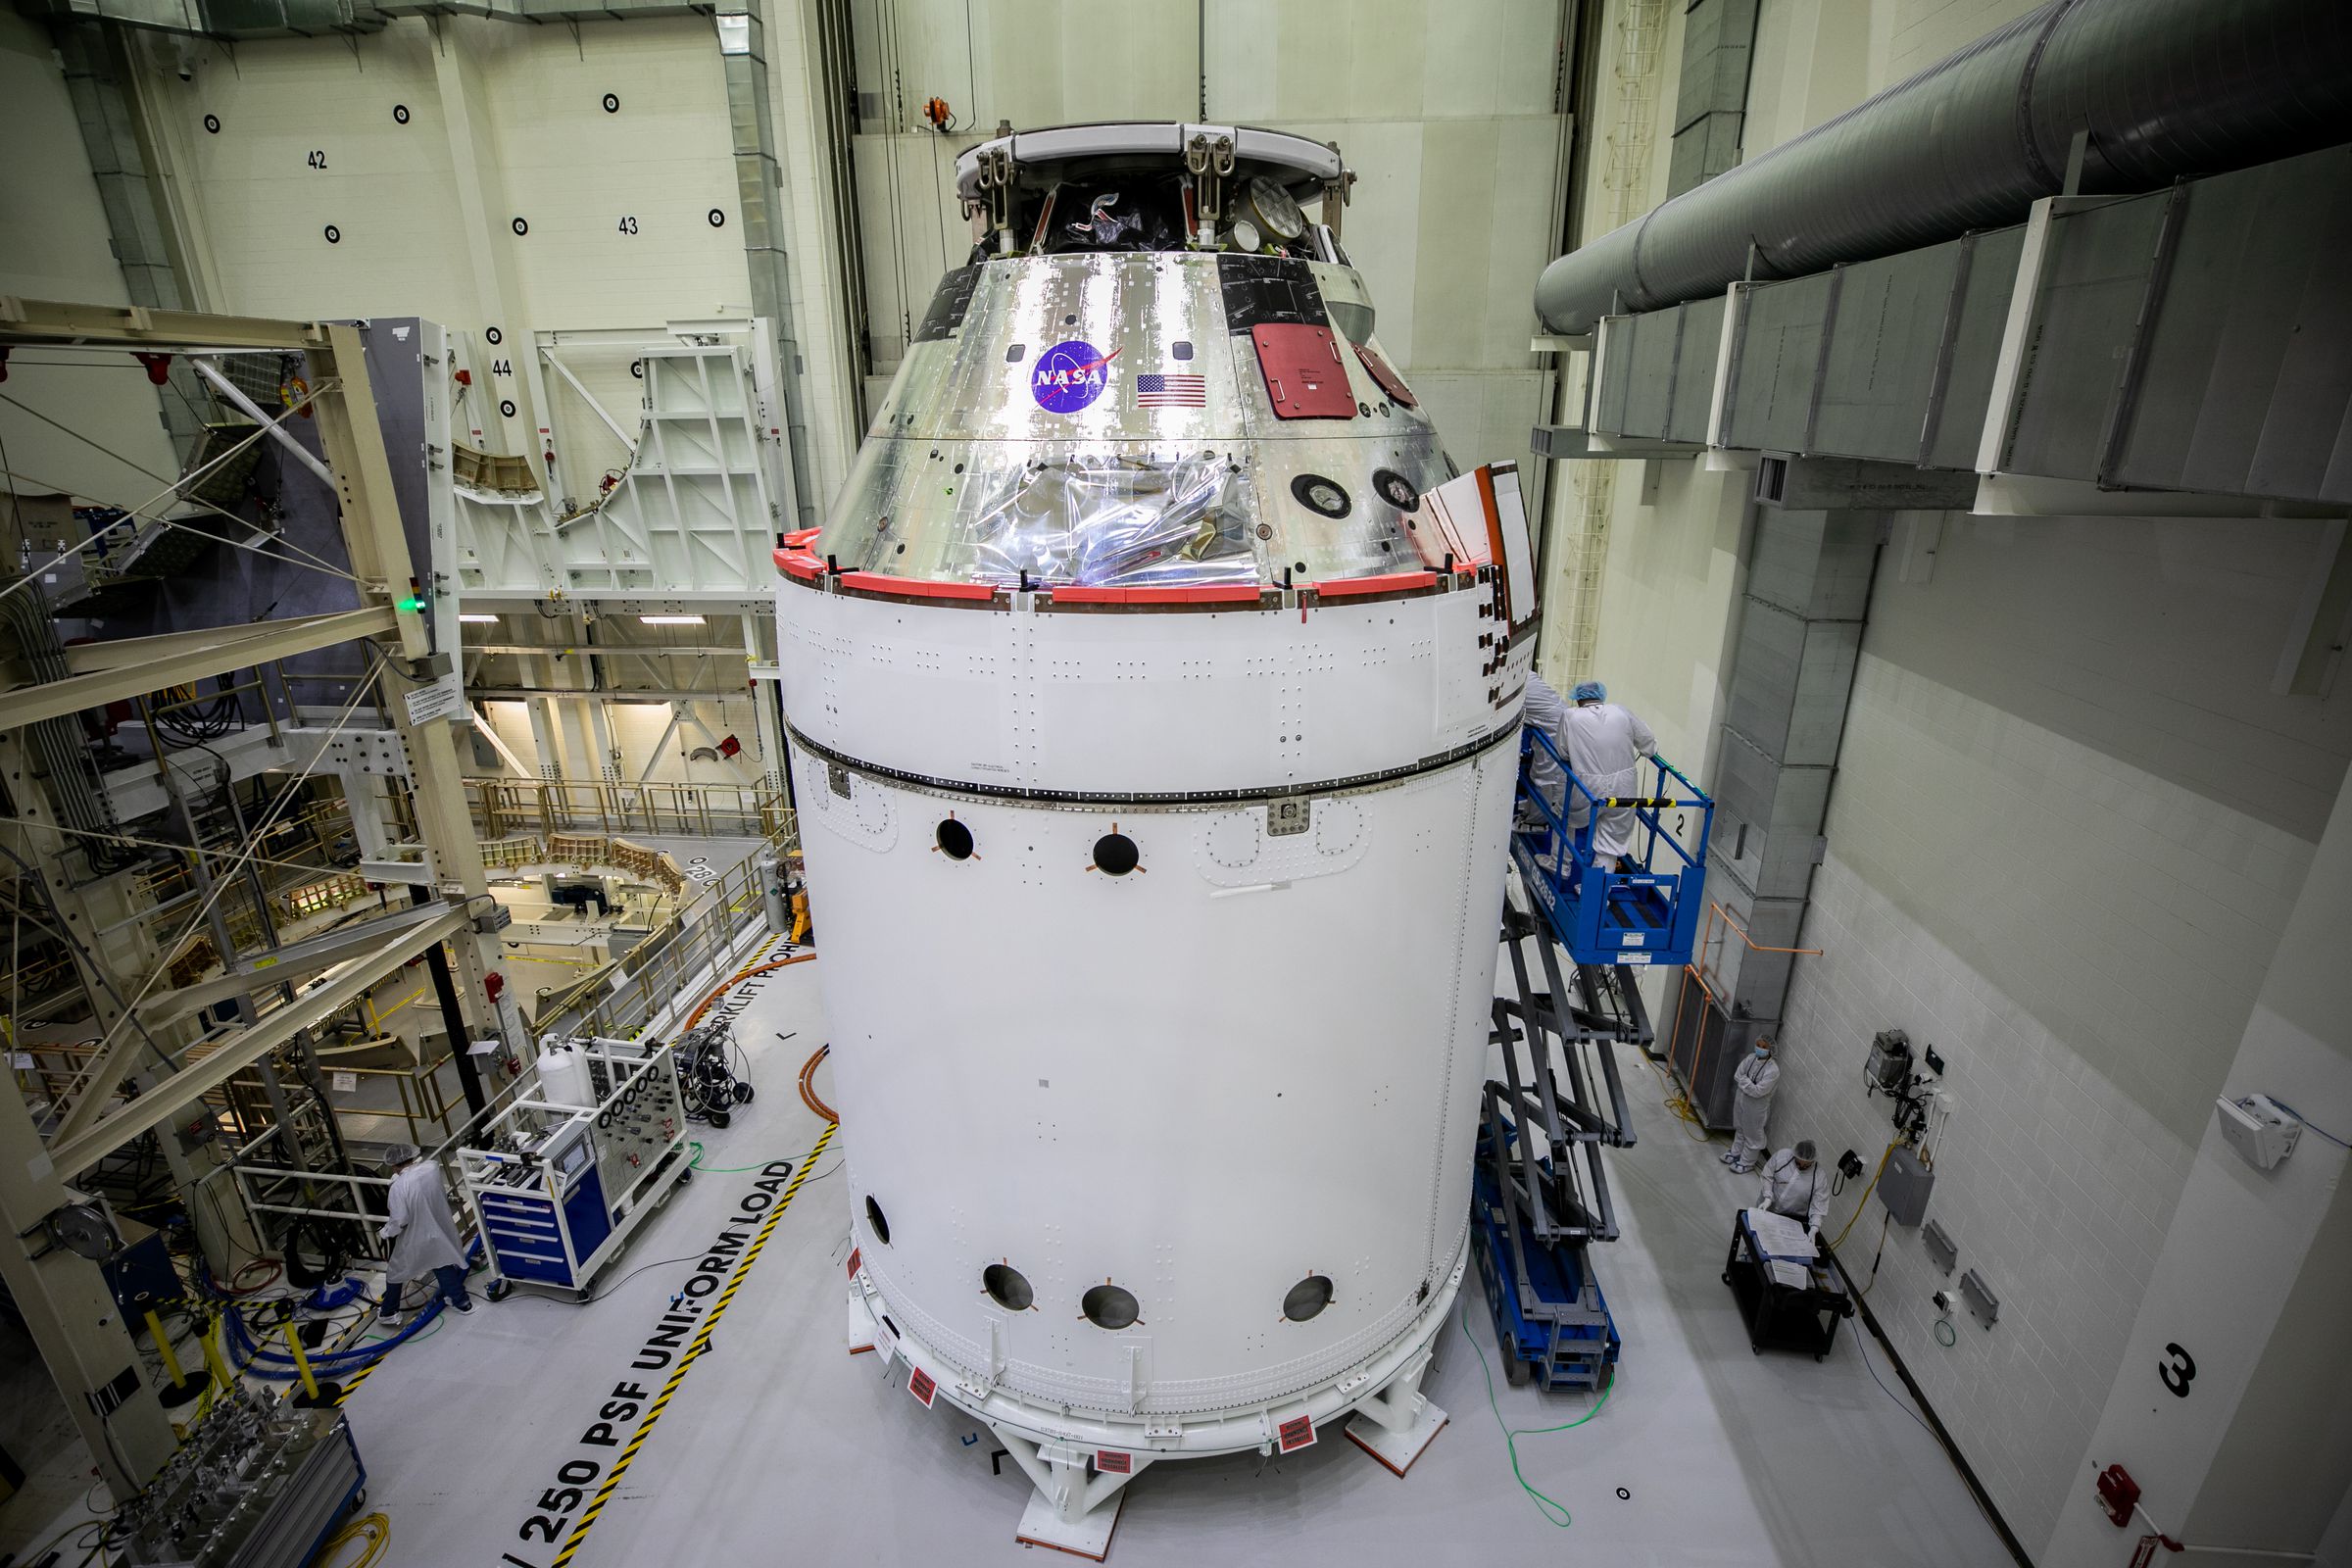 NASA’s Orion crew capsule, attached to the adapter and service module, with spacecraft adapter jettison fairings installed.